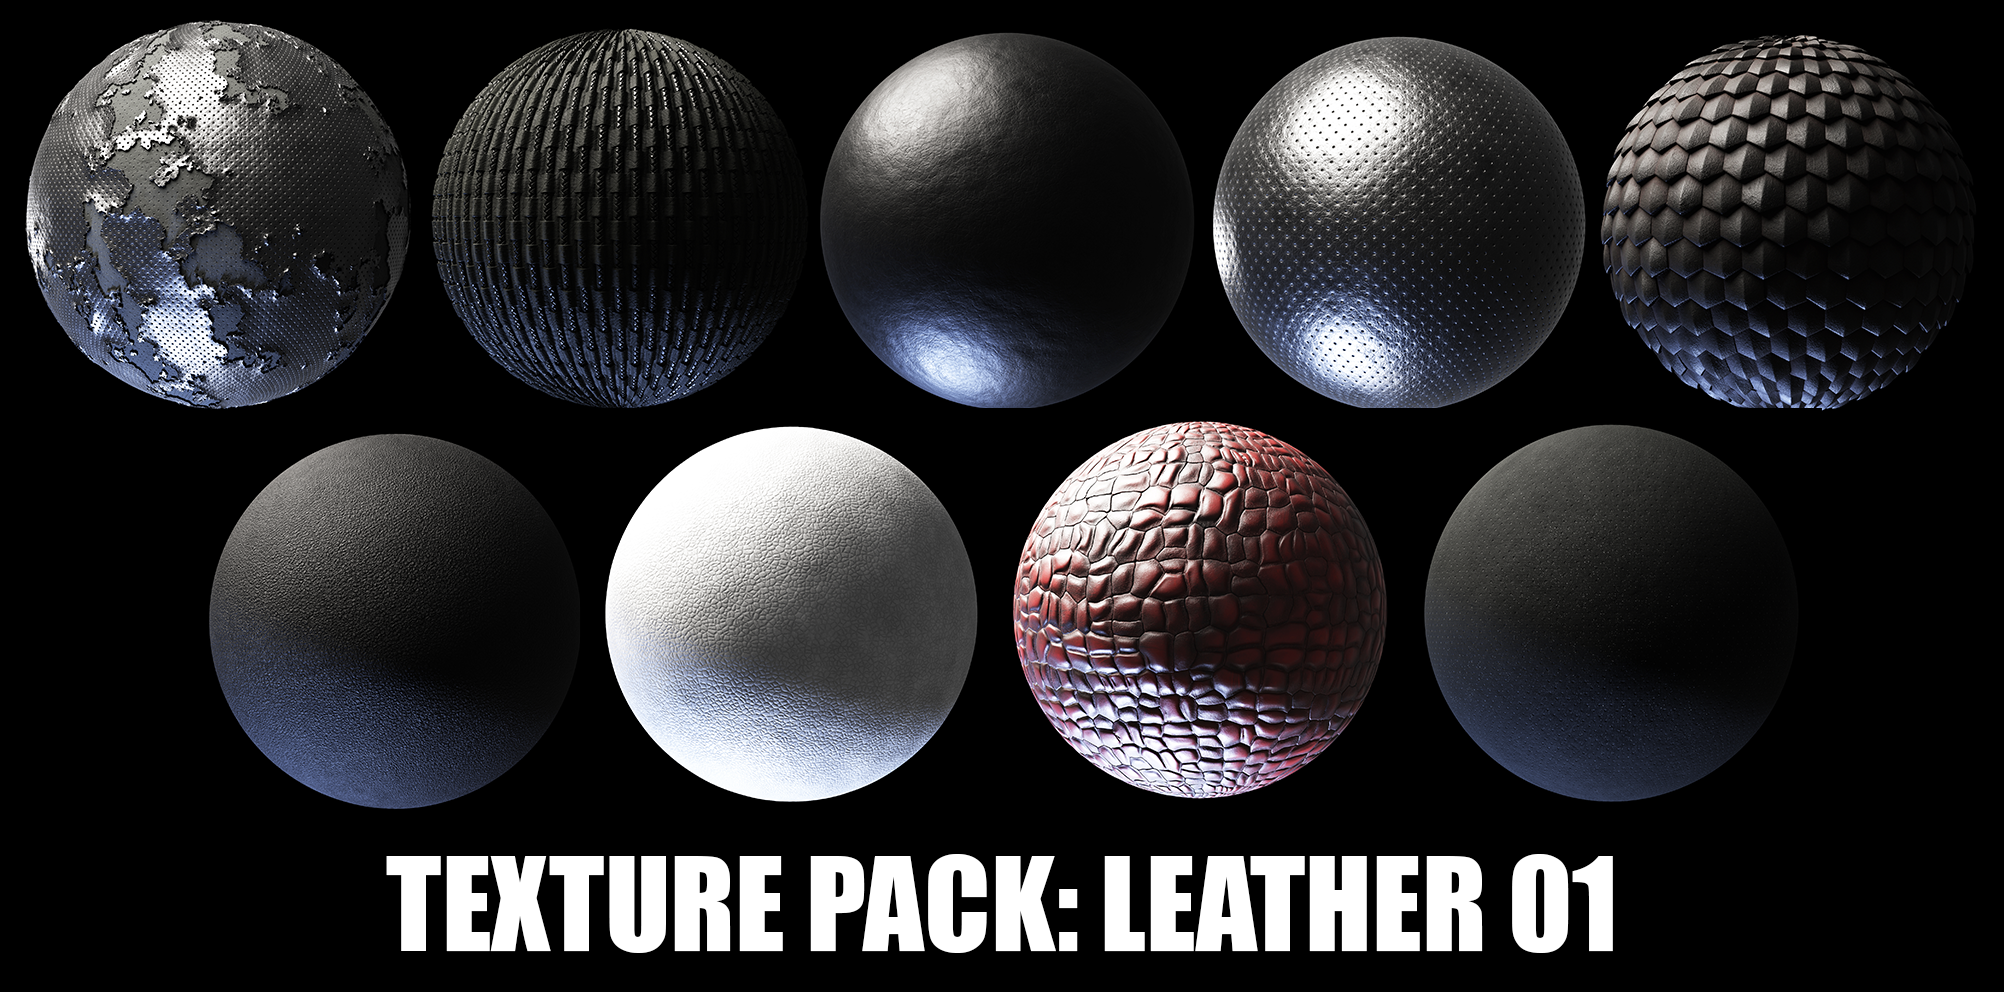 Texture Pack: Leather 01